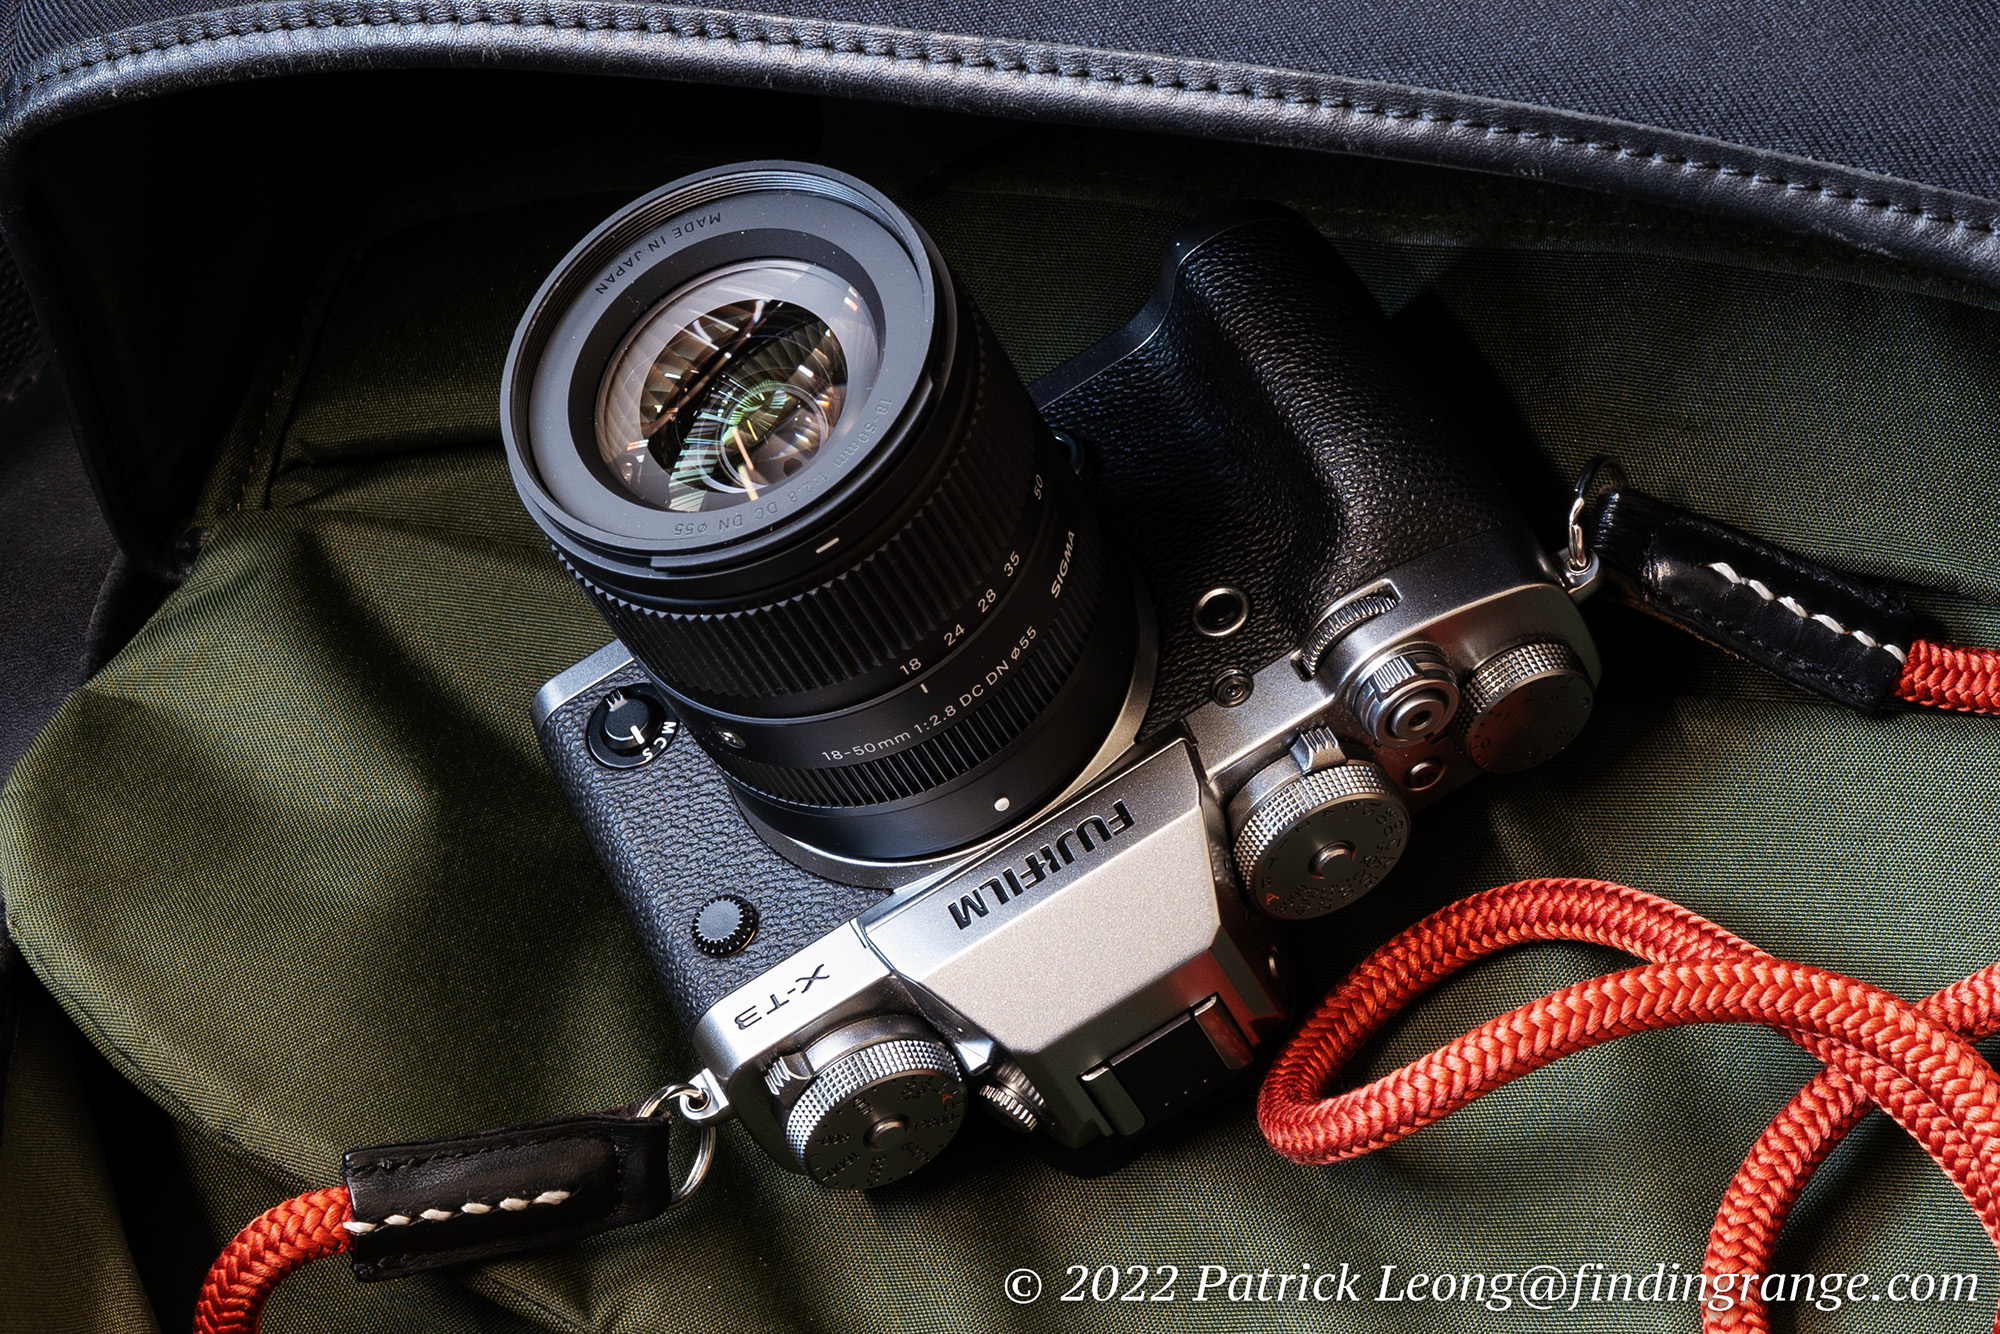 Sigma 18-50mm f2.8 DC DN Contemporary Review Fuji X - Finding Range